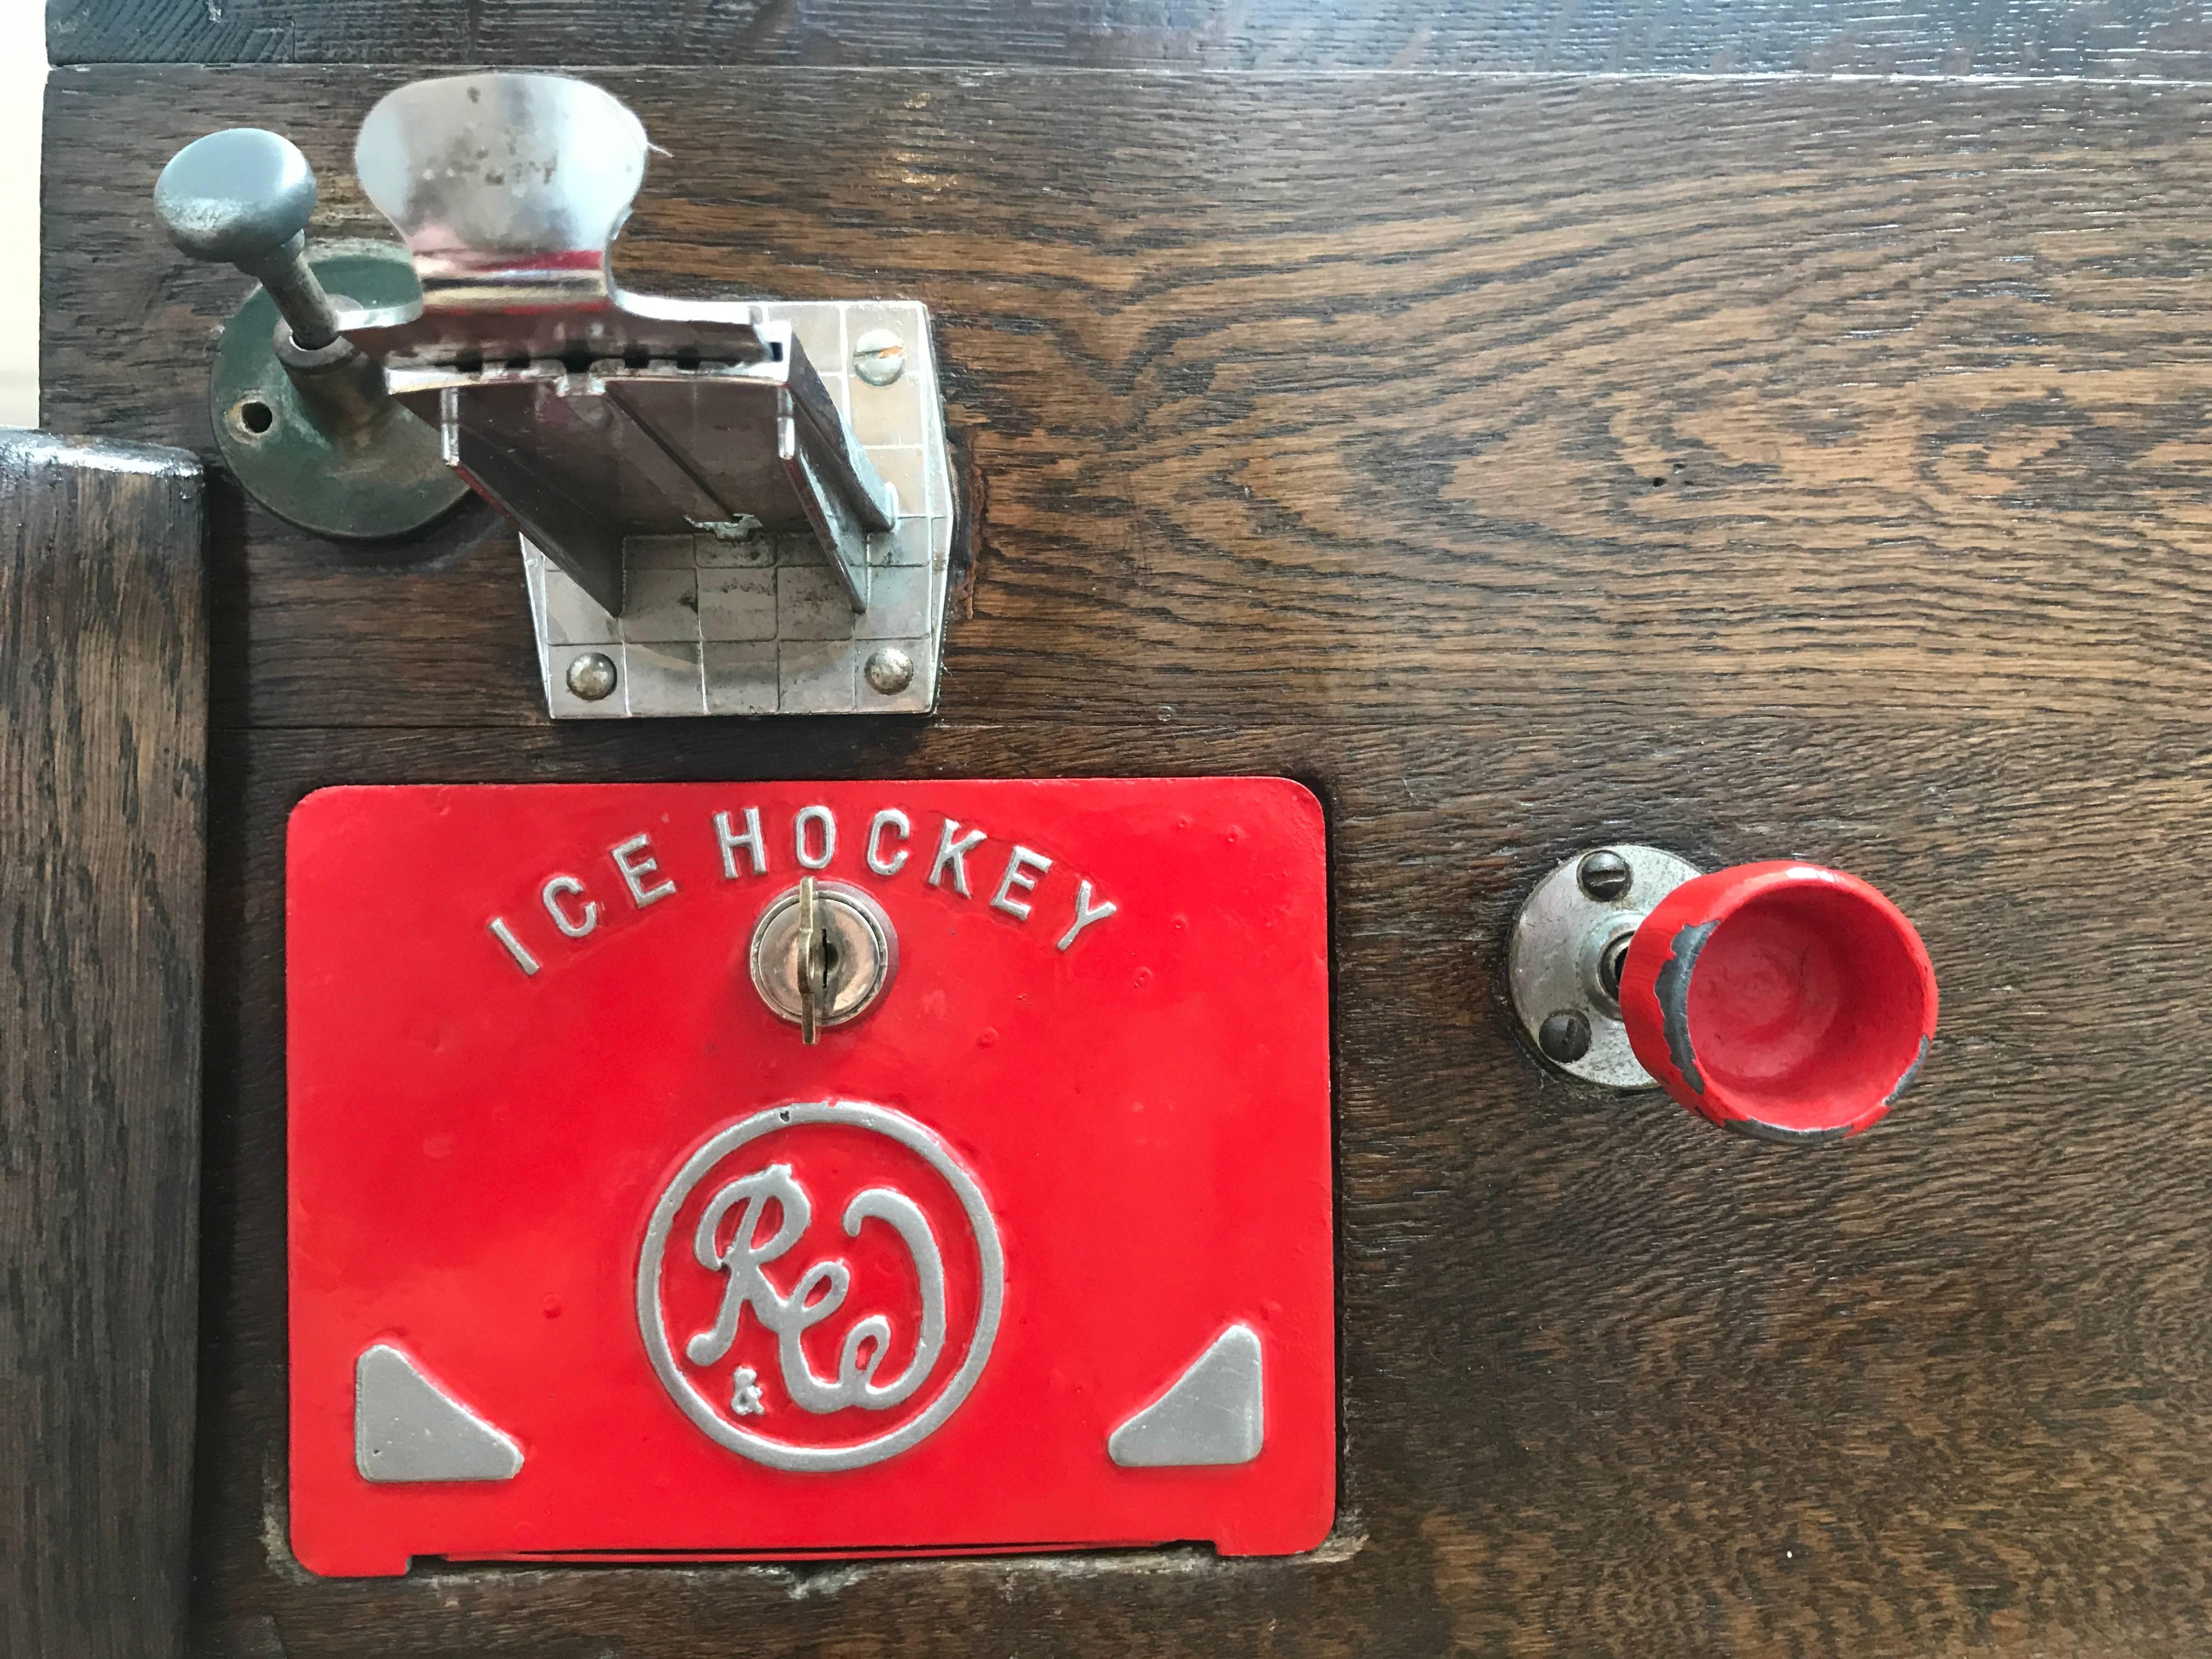 An incredibly sweet, vintage Ice Hockey Game by Ruffler & Walker of London UK from the 1950s manufactured in solid oak. 

This is a real find and incredibly rare to find an item like this in such good condition other than in a museum. All parts